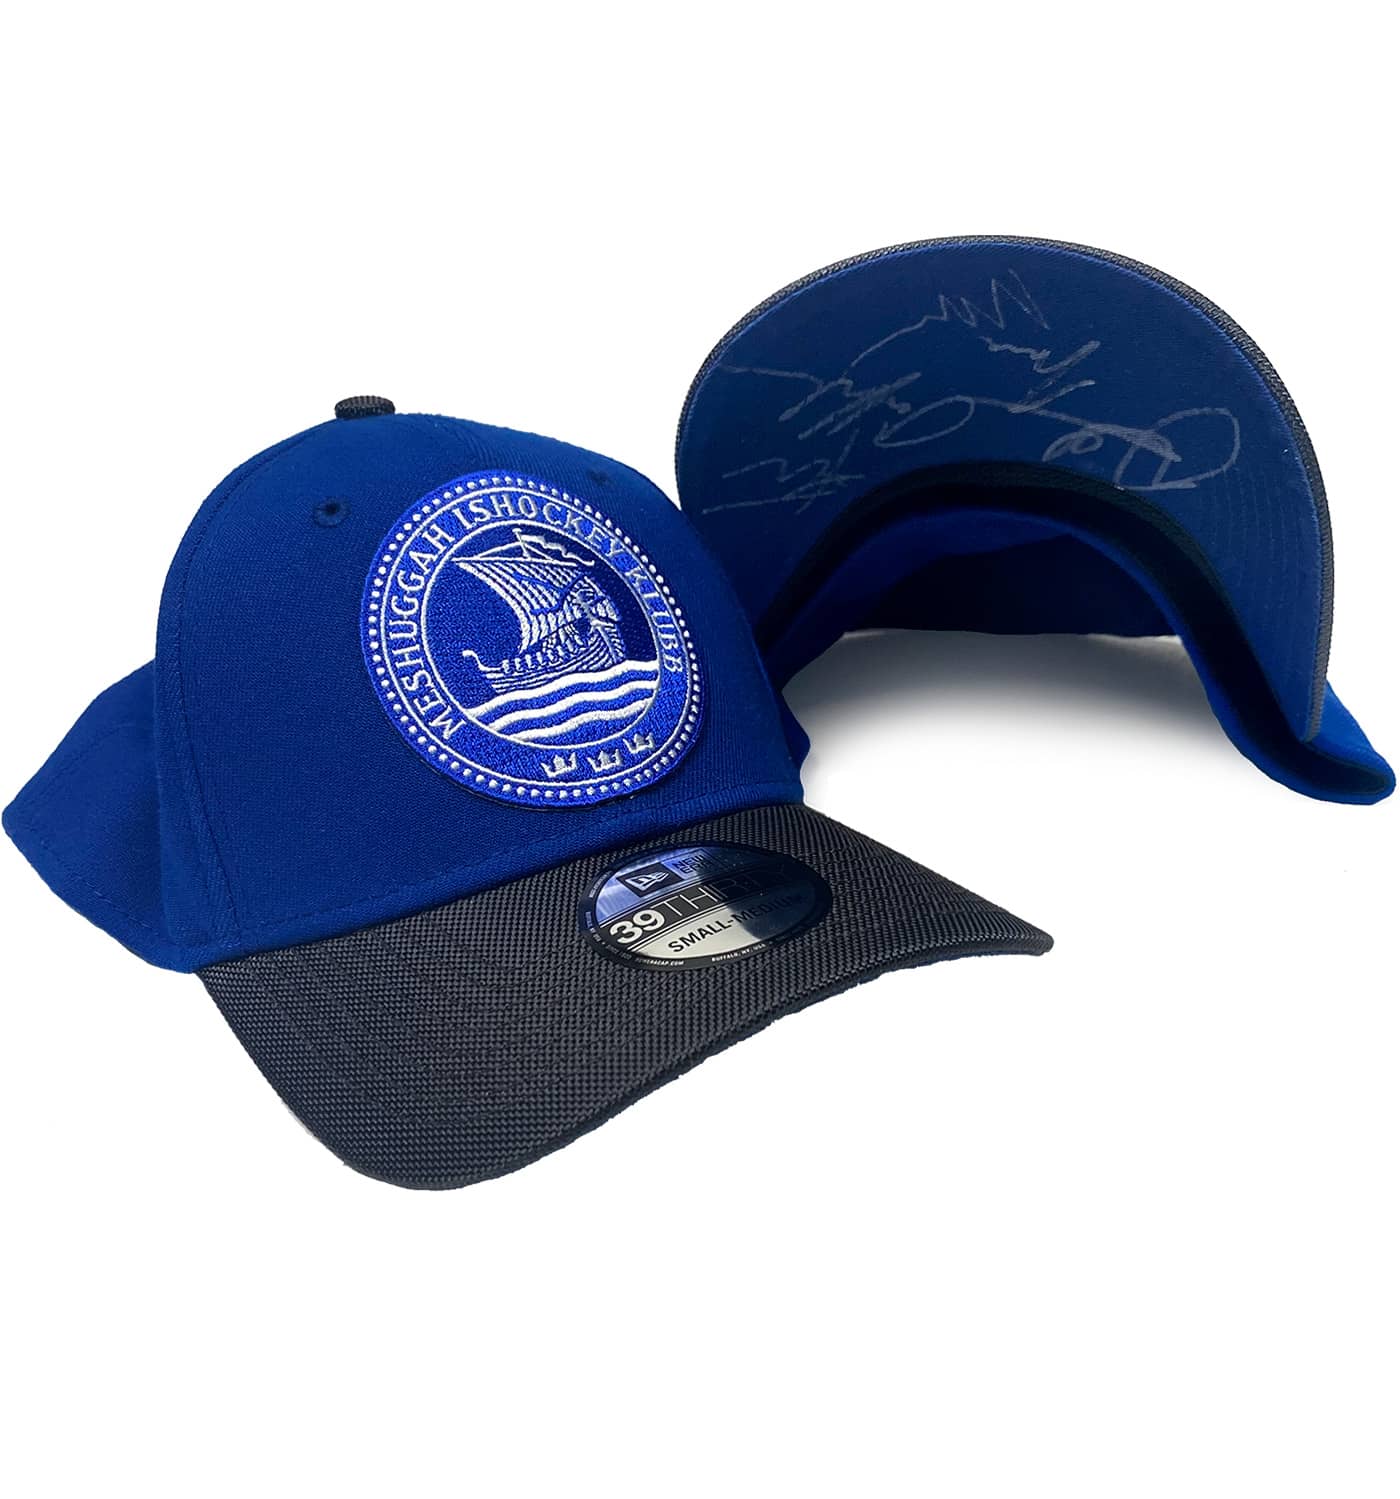 MESHUGGAH 'ISHOCKEY' limited edition autographed stretch fit hockey cap in royal with charcoal brim